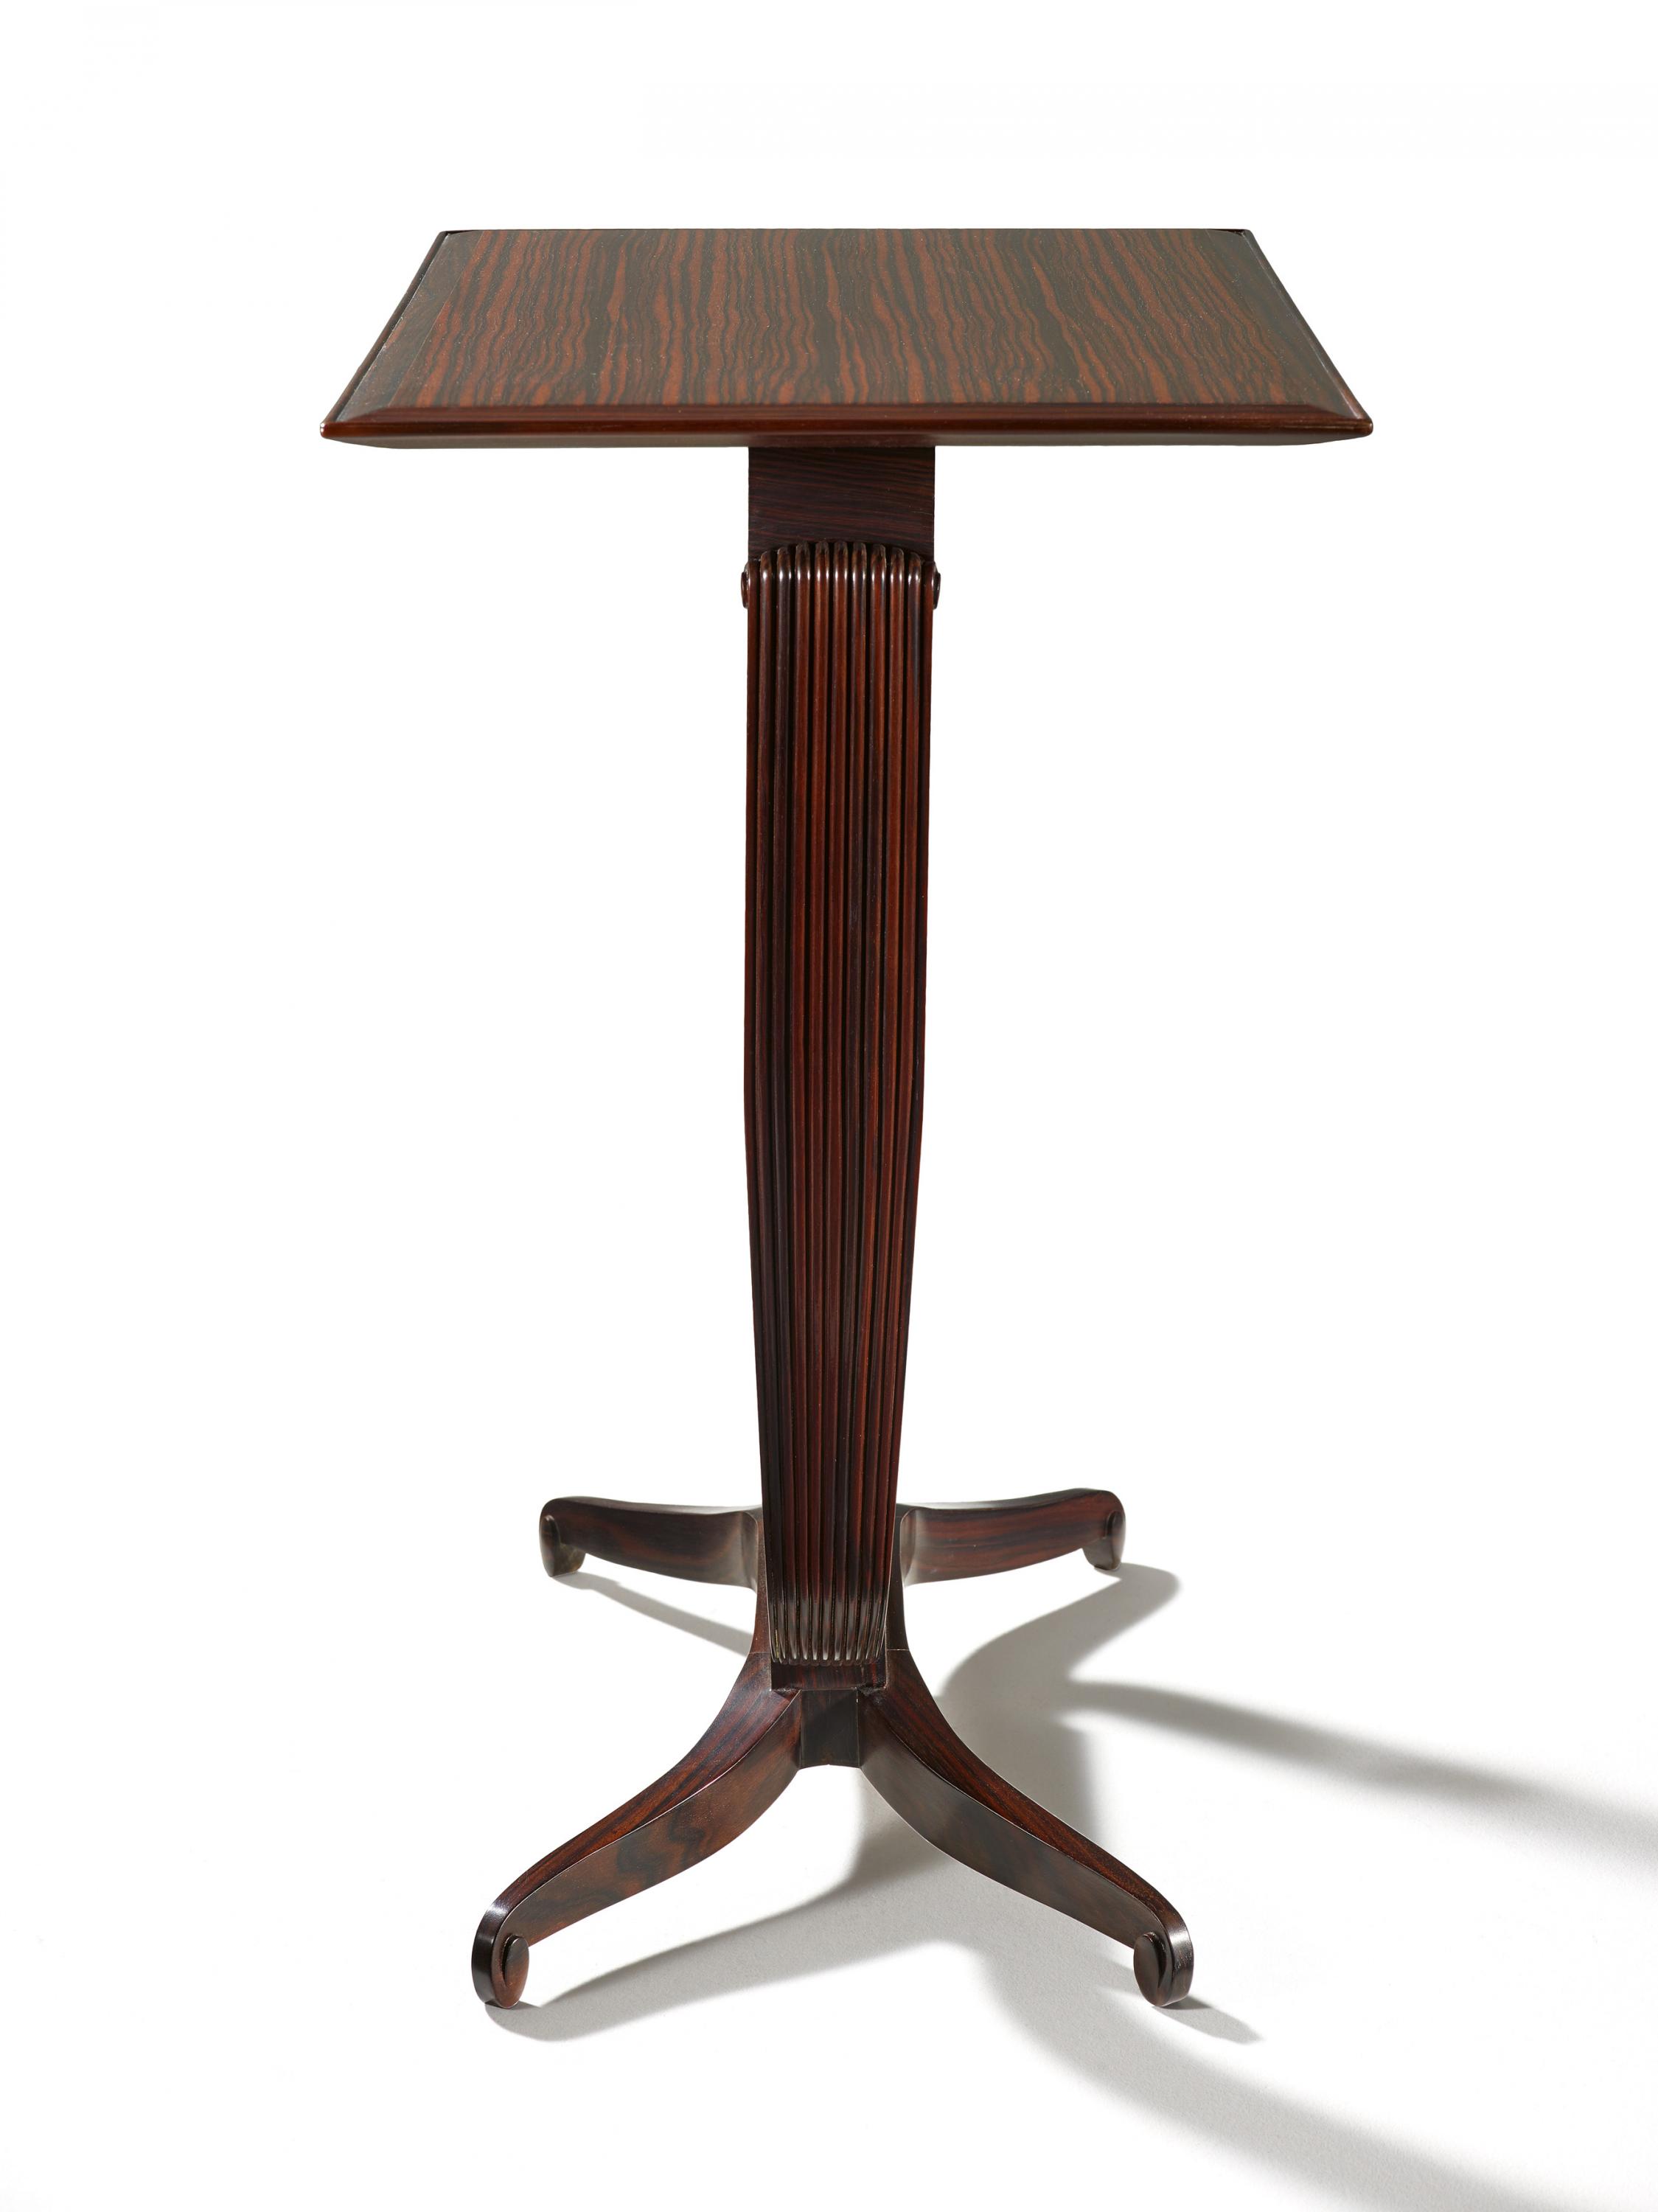 PAIR OF MACASSAR EBONY ART NOUVEAU SIDE TABLES OF MUSEUM-LIKE QUALITY, BLOCH MODEL. Ruhlmann, - Image 3 of 5